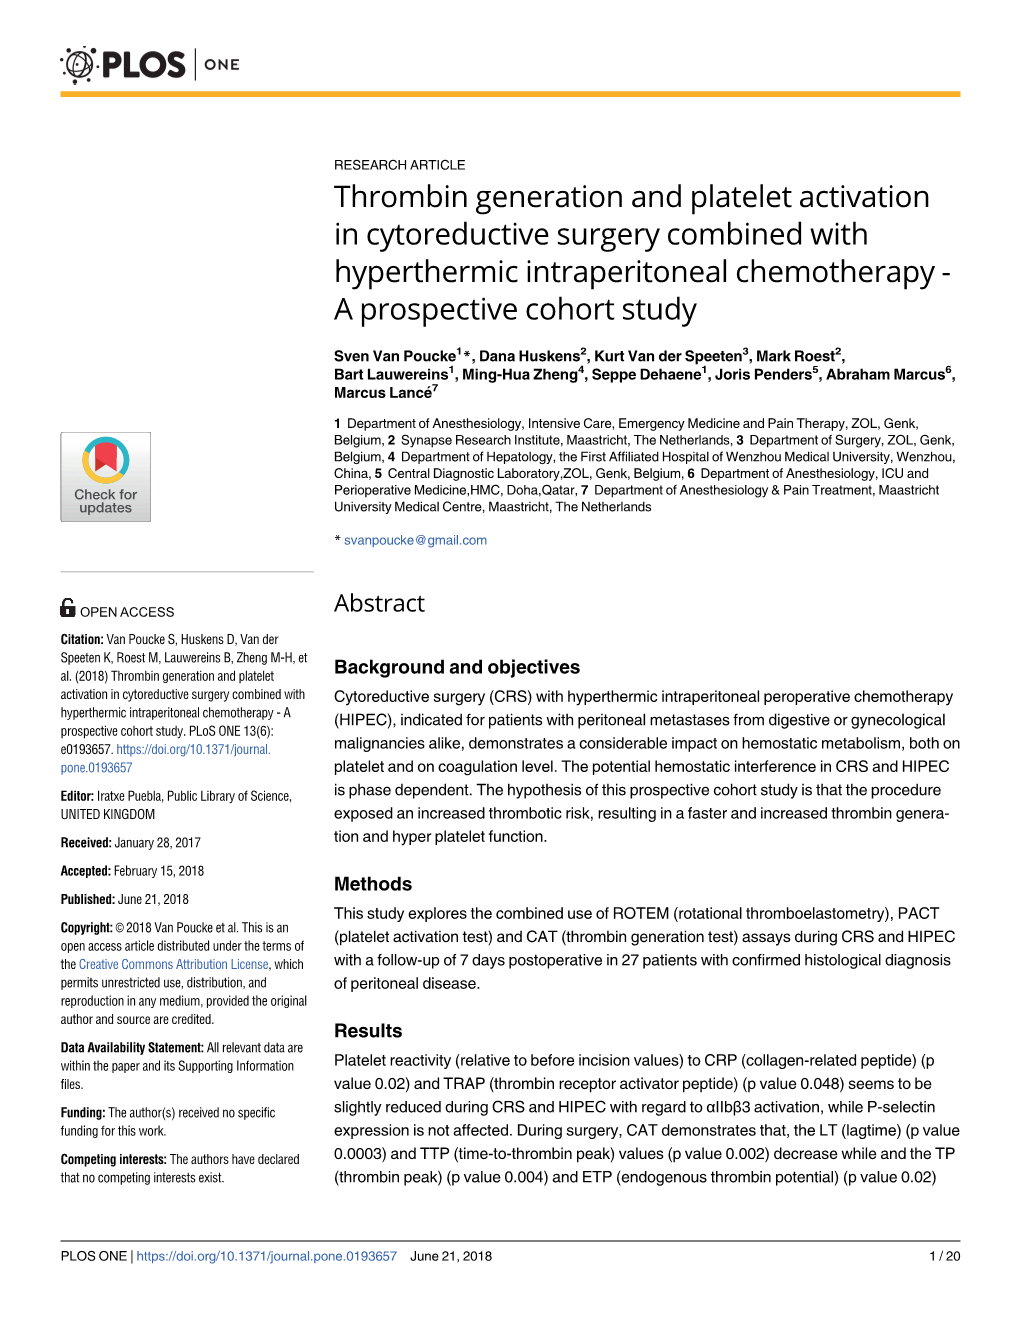 Thrombin Generation and Platelet Activation in Cytoreductive Surgery Combined with Hyperthermic Intraperitoneal Chemotherapy - a Prospective Cohort Study